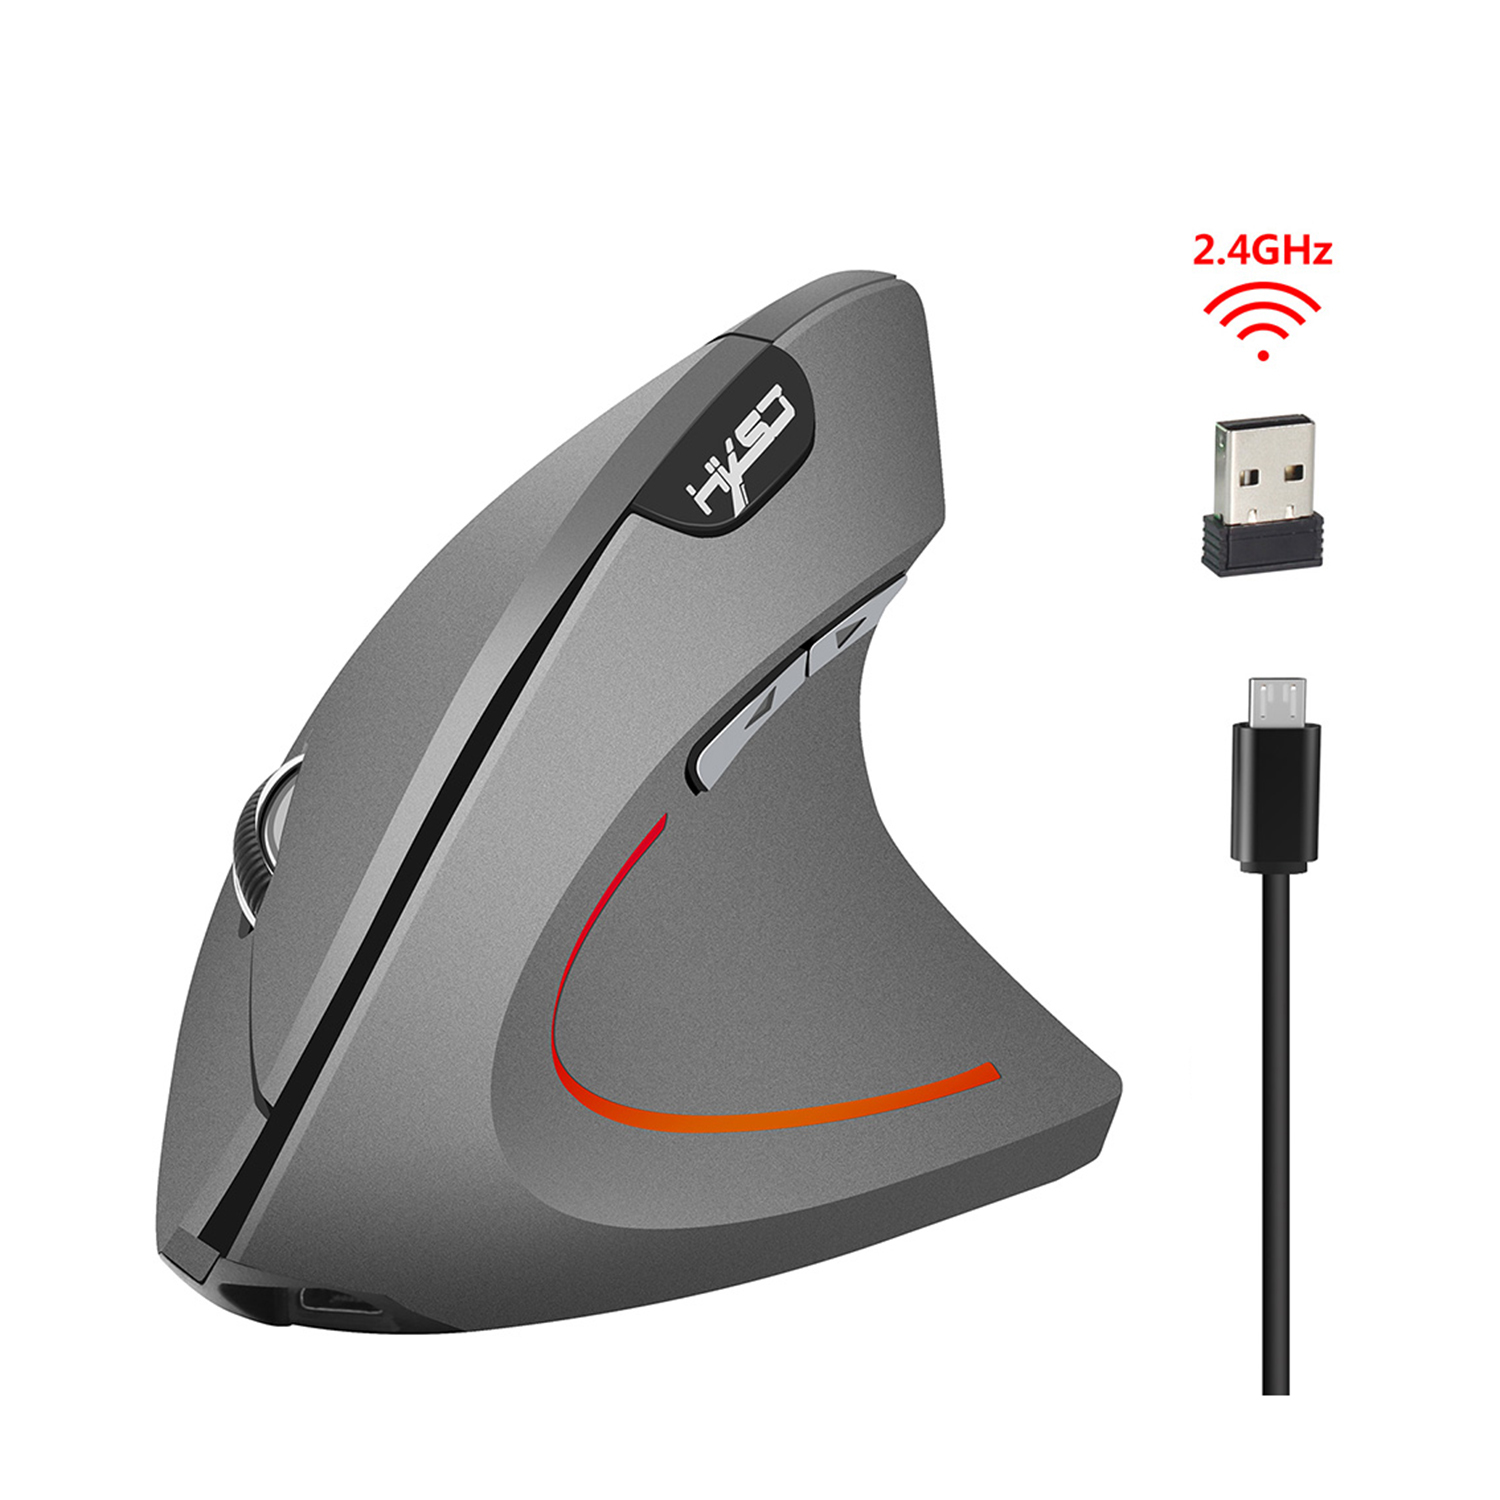 2.4GHz Wireless Vertical Mouse Ergonomic Optical Mouse With 2400DPI JOY